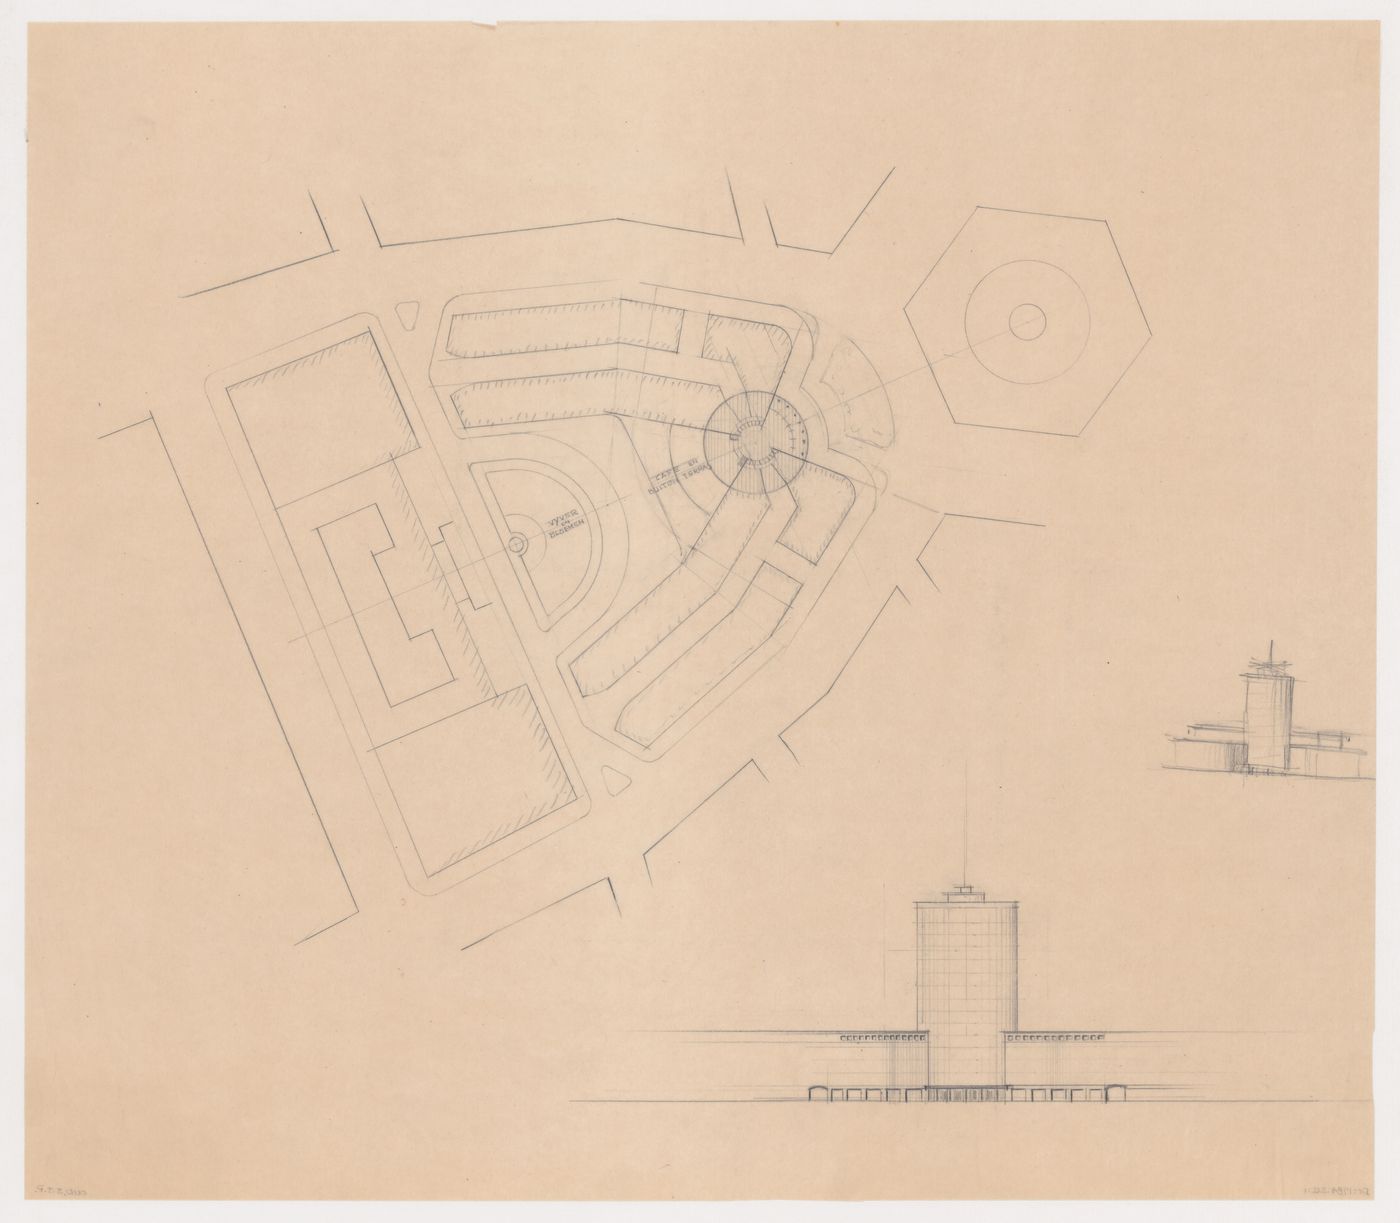 Site plan for the reconstruction of the Hofplein (city centre) showing Industriegebouw Plan B and monument plaza and an elevation and sketch elevation for Industriegebouw Plan B, Rotterdam, Netherlands